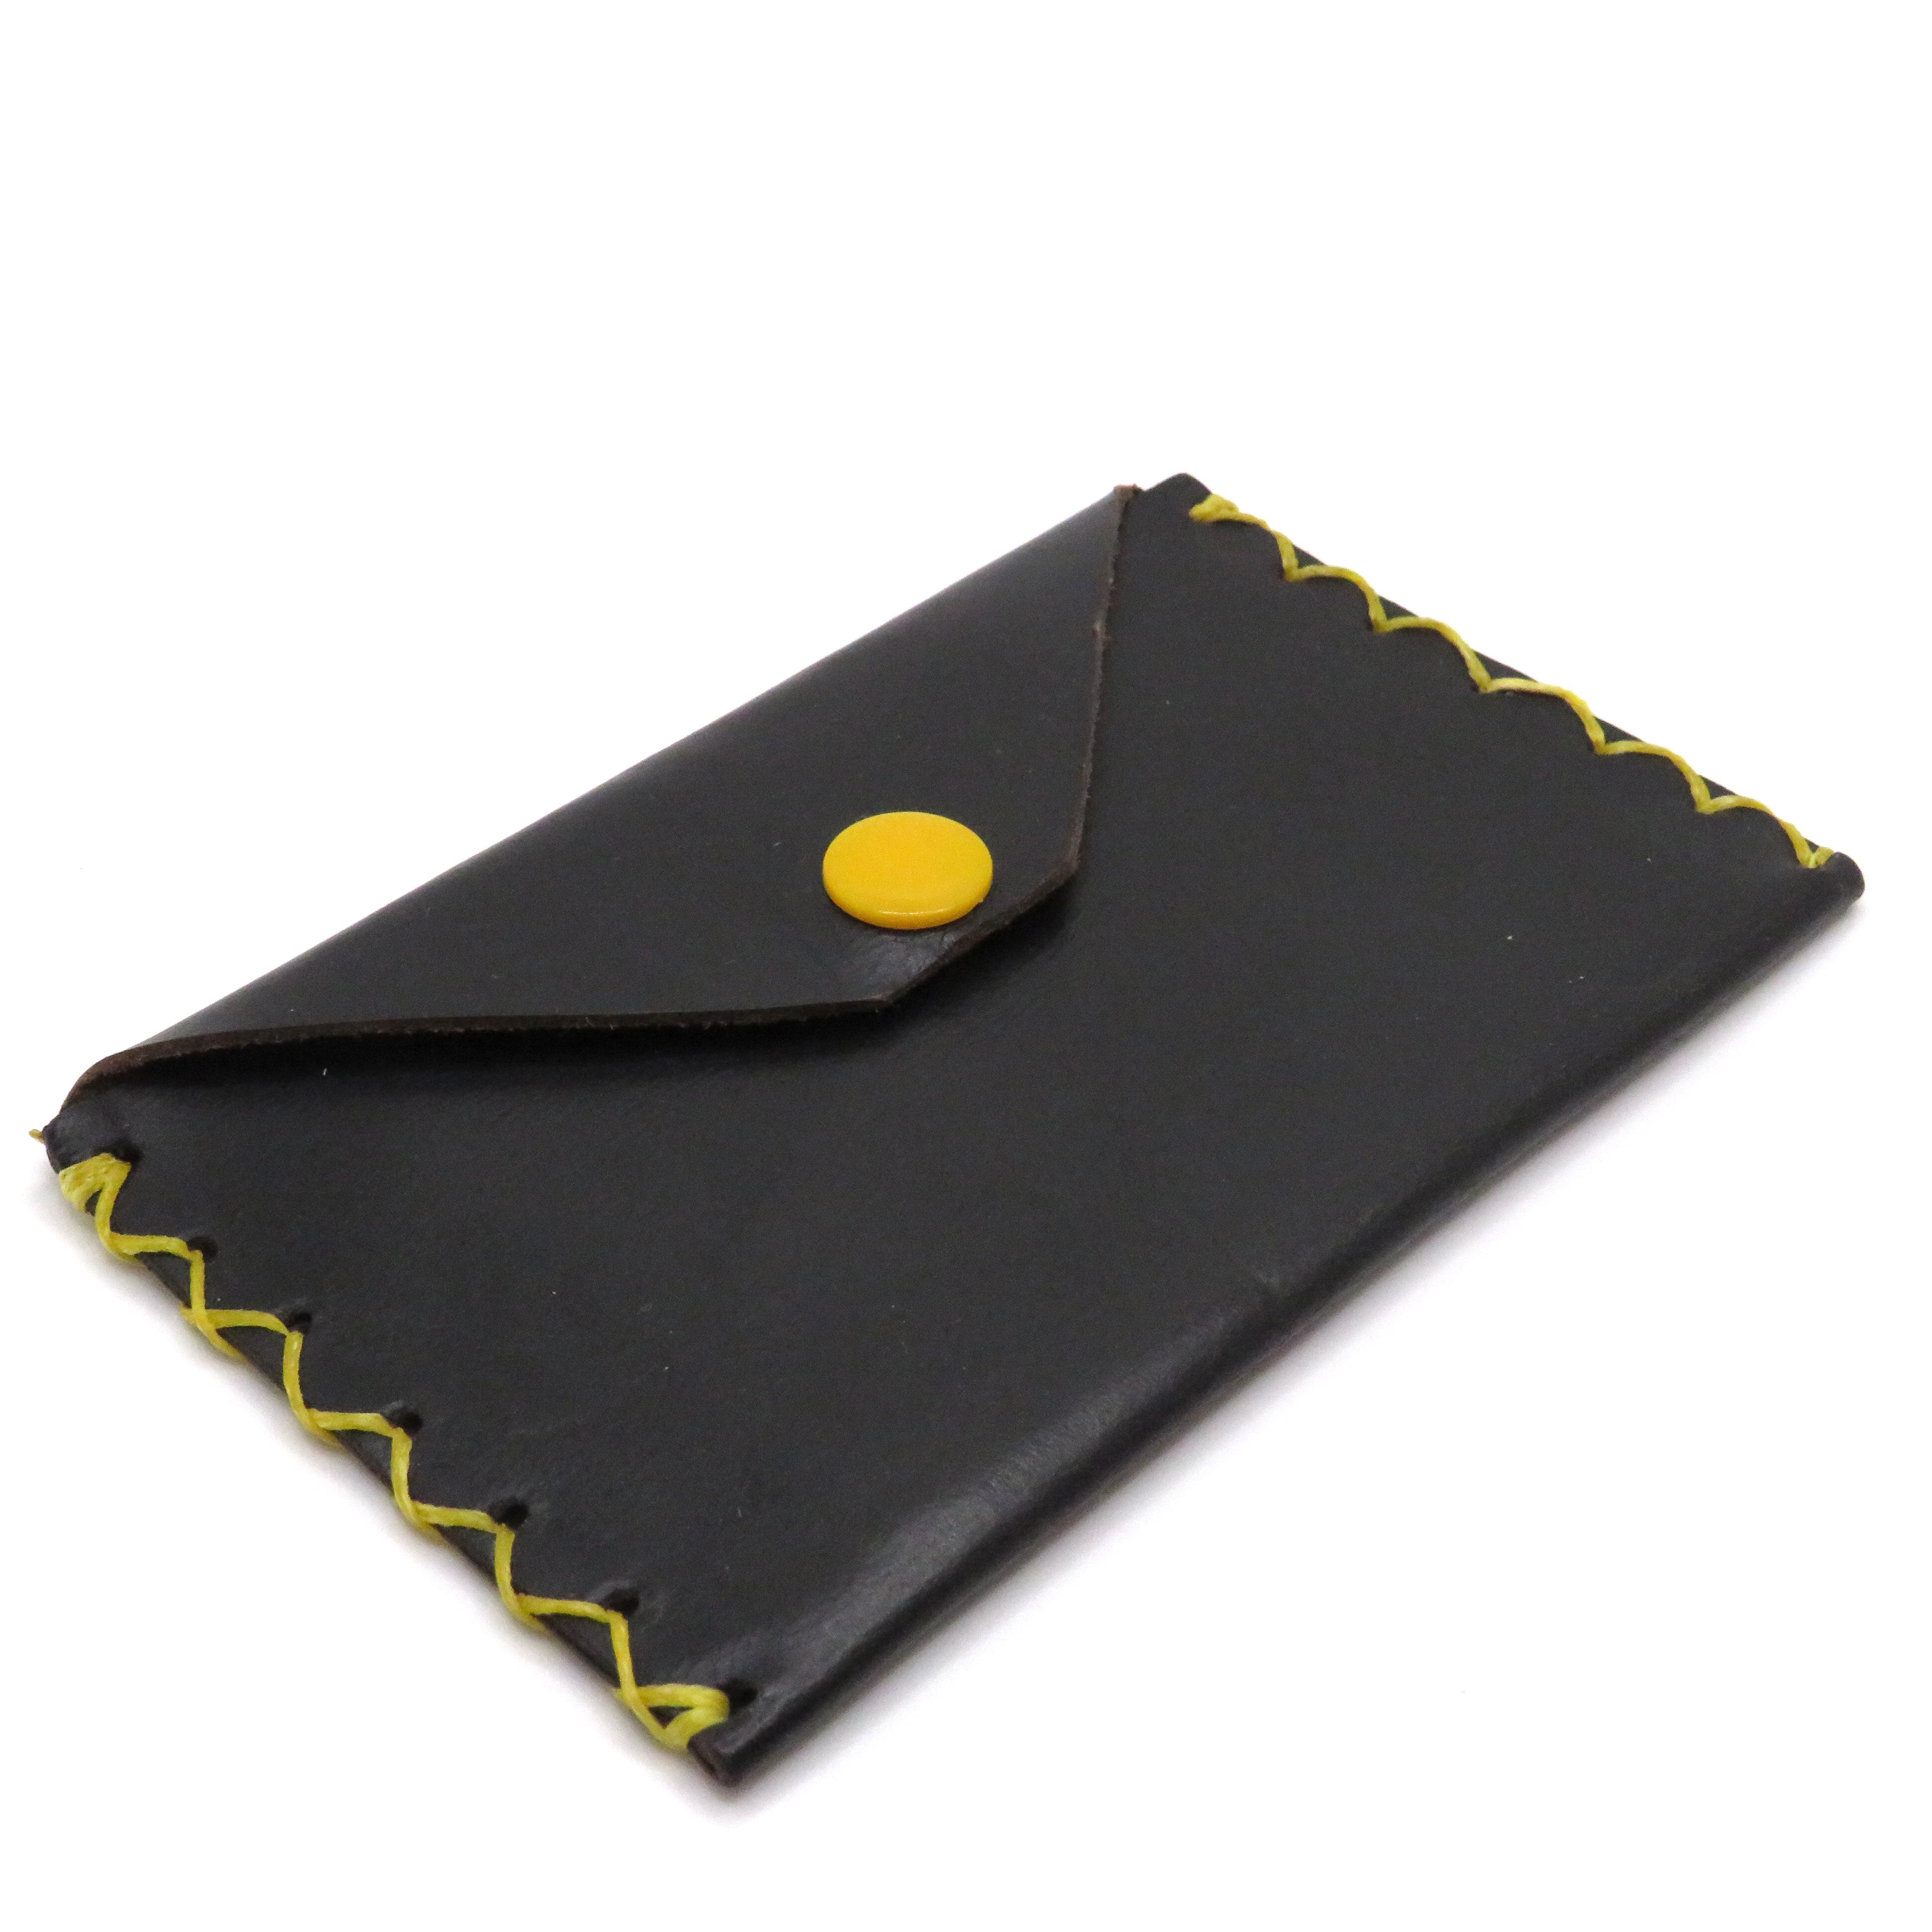 handmade black leather pouch